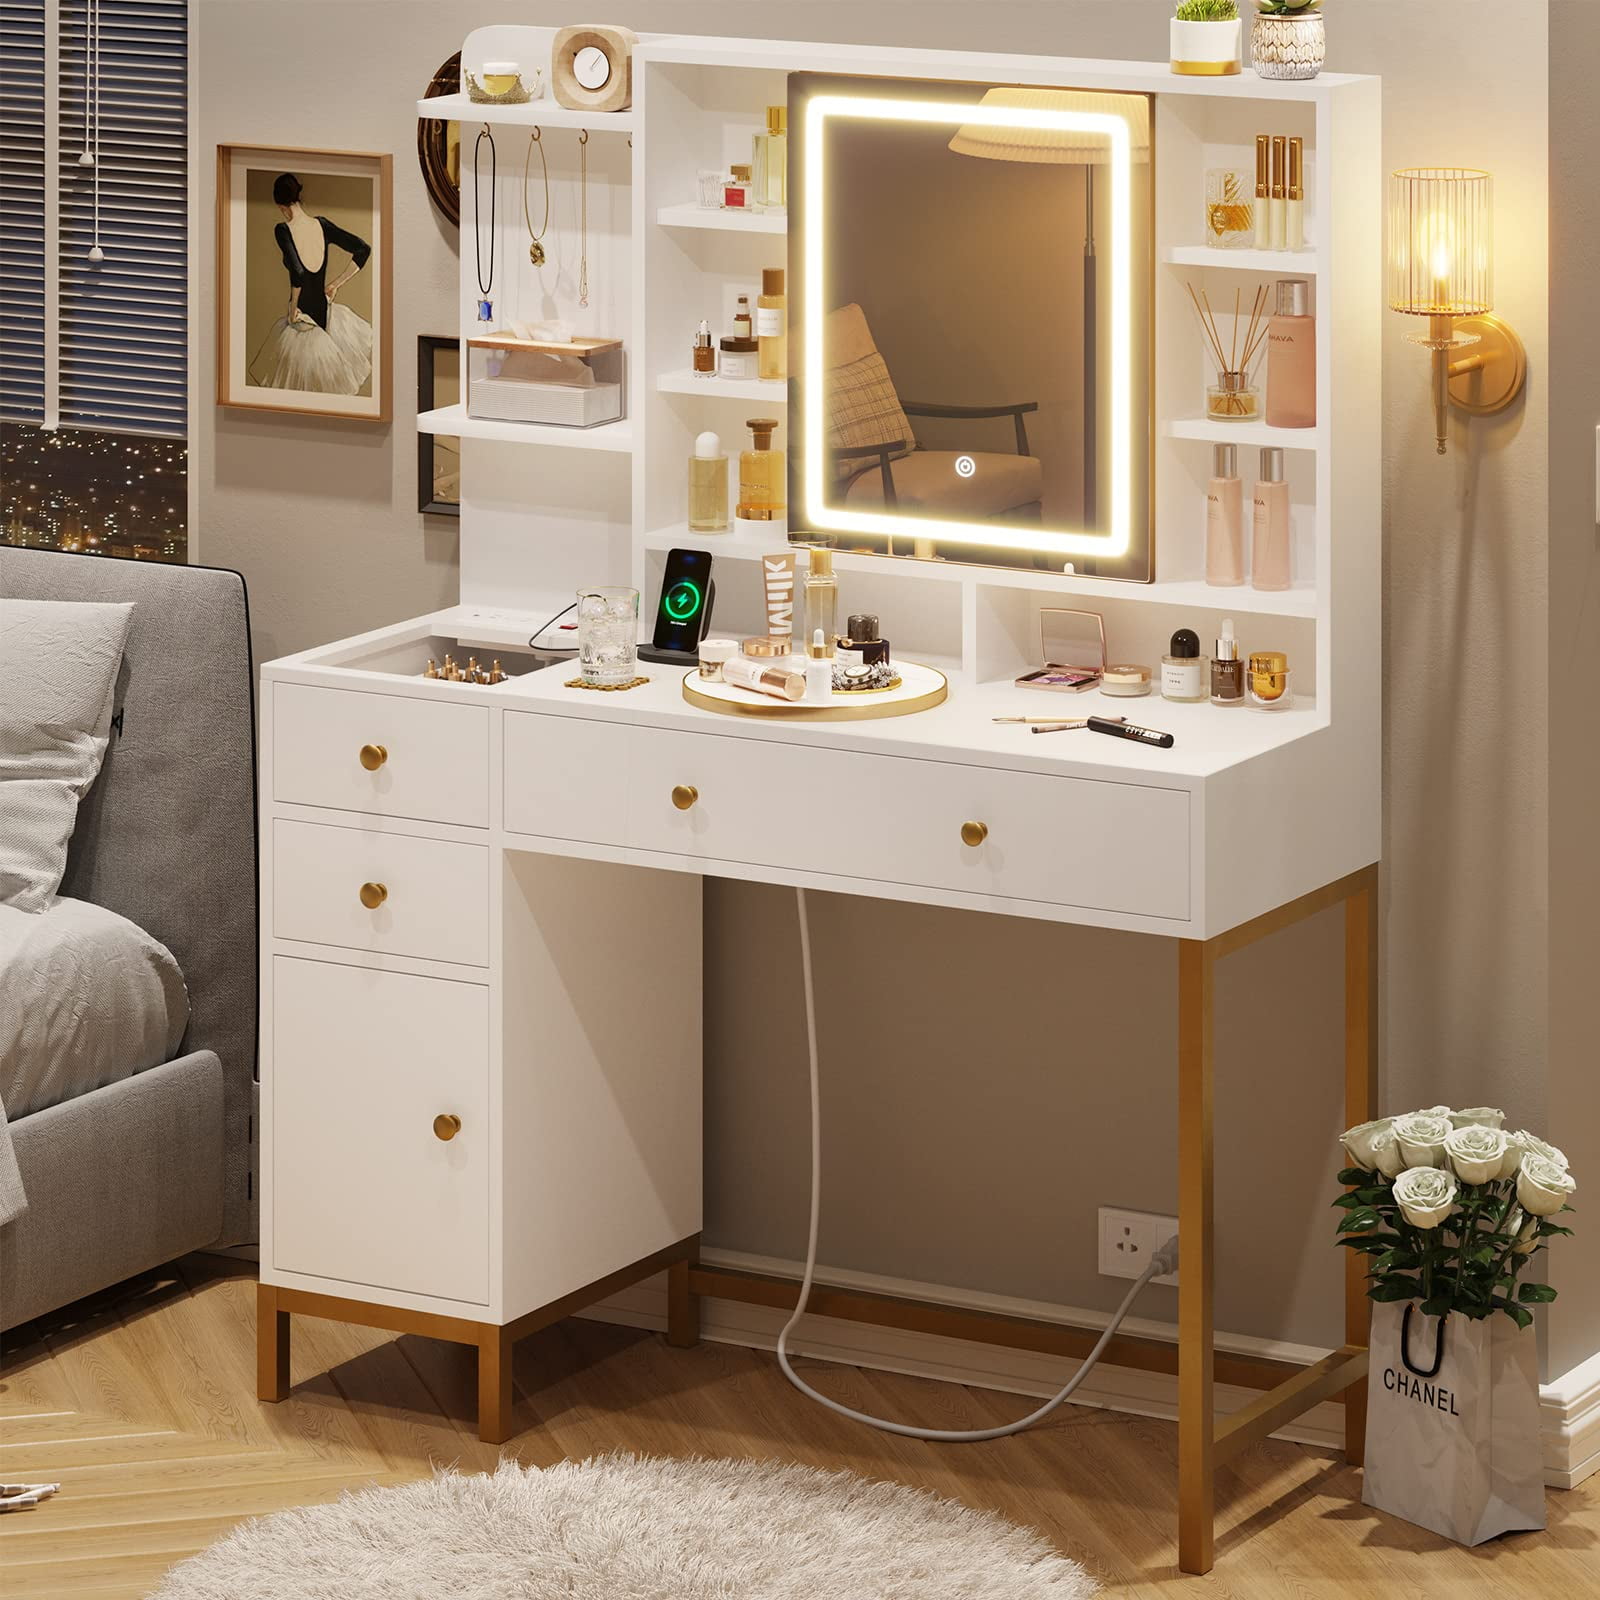 AOGLLATI Vanity Desk with Lighted Mirror White Vanity Table with Charging Station, Makeup Desk with Visible Drawers, Hidden Open Storage Shelves - Walmart.com